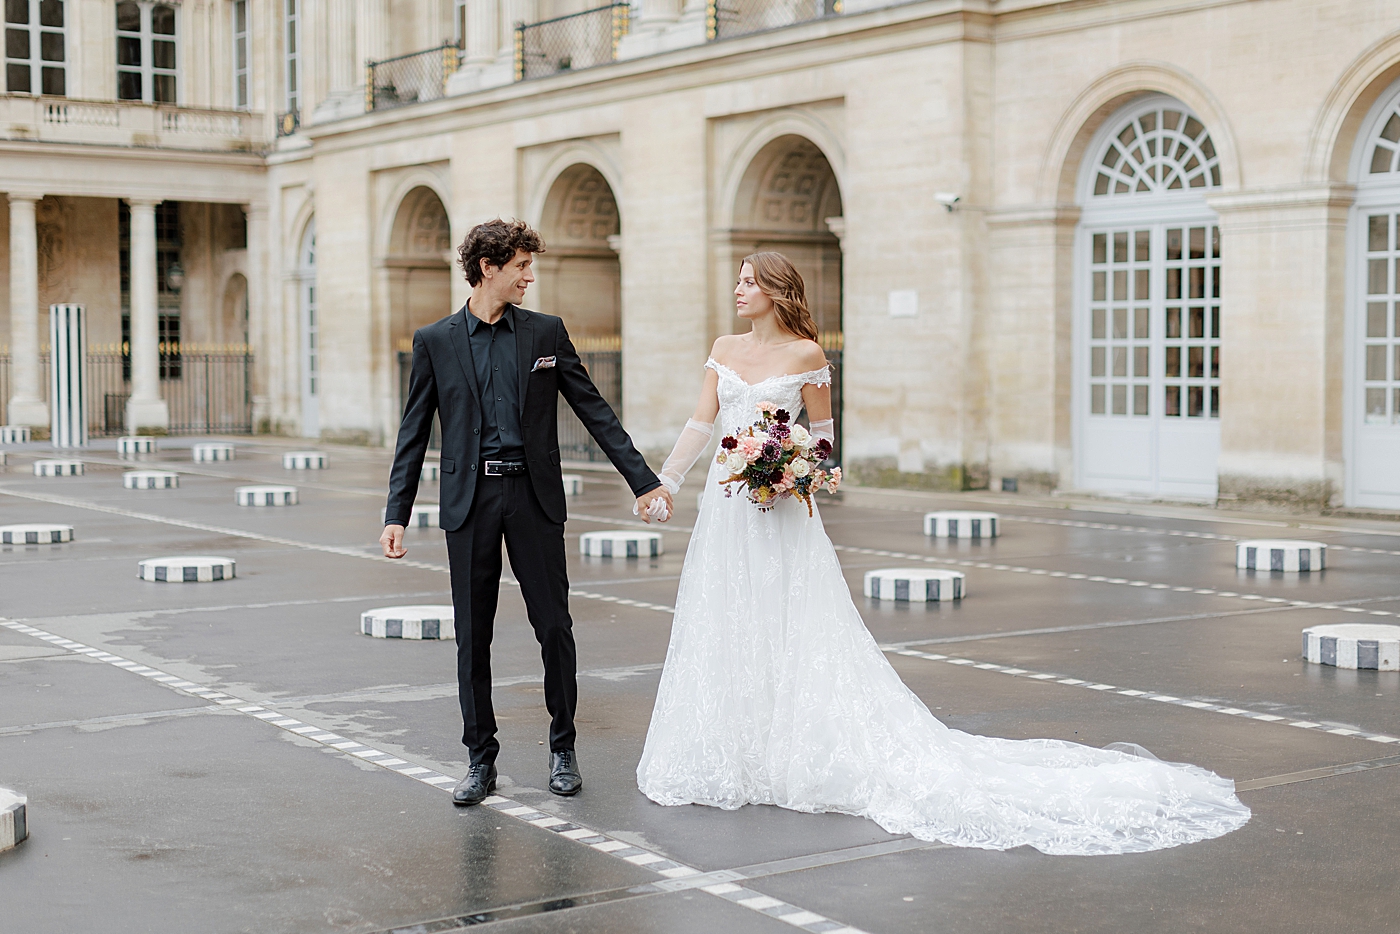 Bride and groom starting to walk while looking at each other with a European chateau in the background | Image by Hope Helmuth Photography